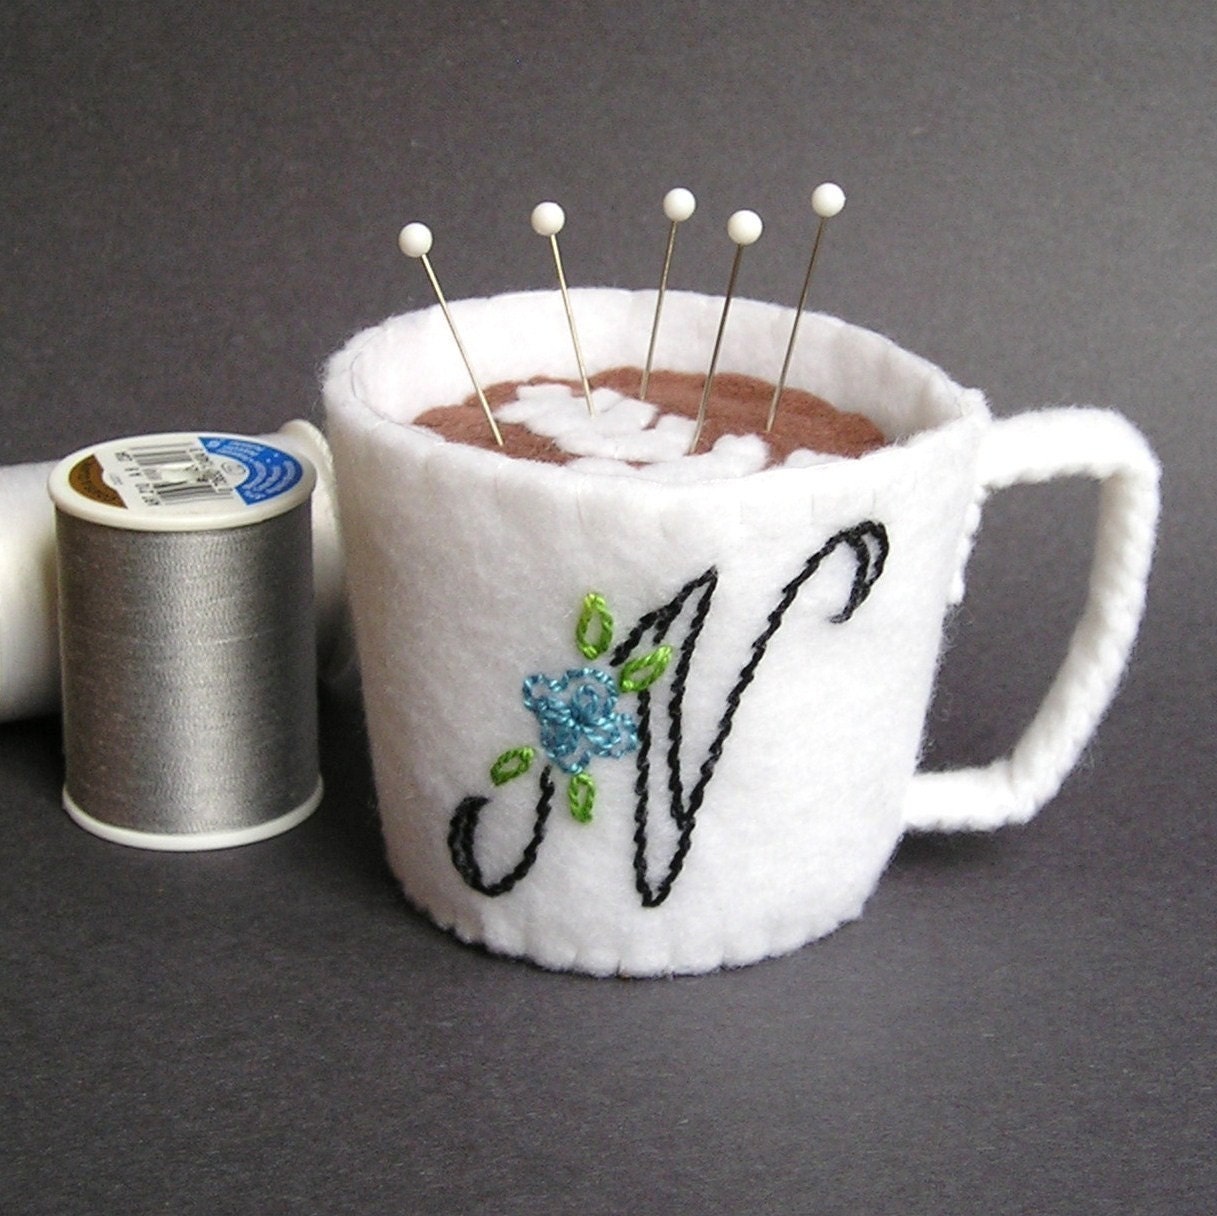 Emery Pincushion / Pin Cushion -  Felt Cup of Cafe Latte / Coffee -  Personalized Monogram